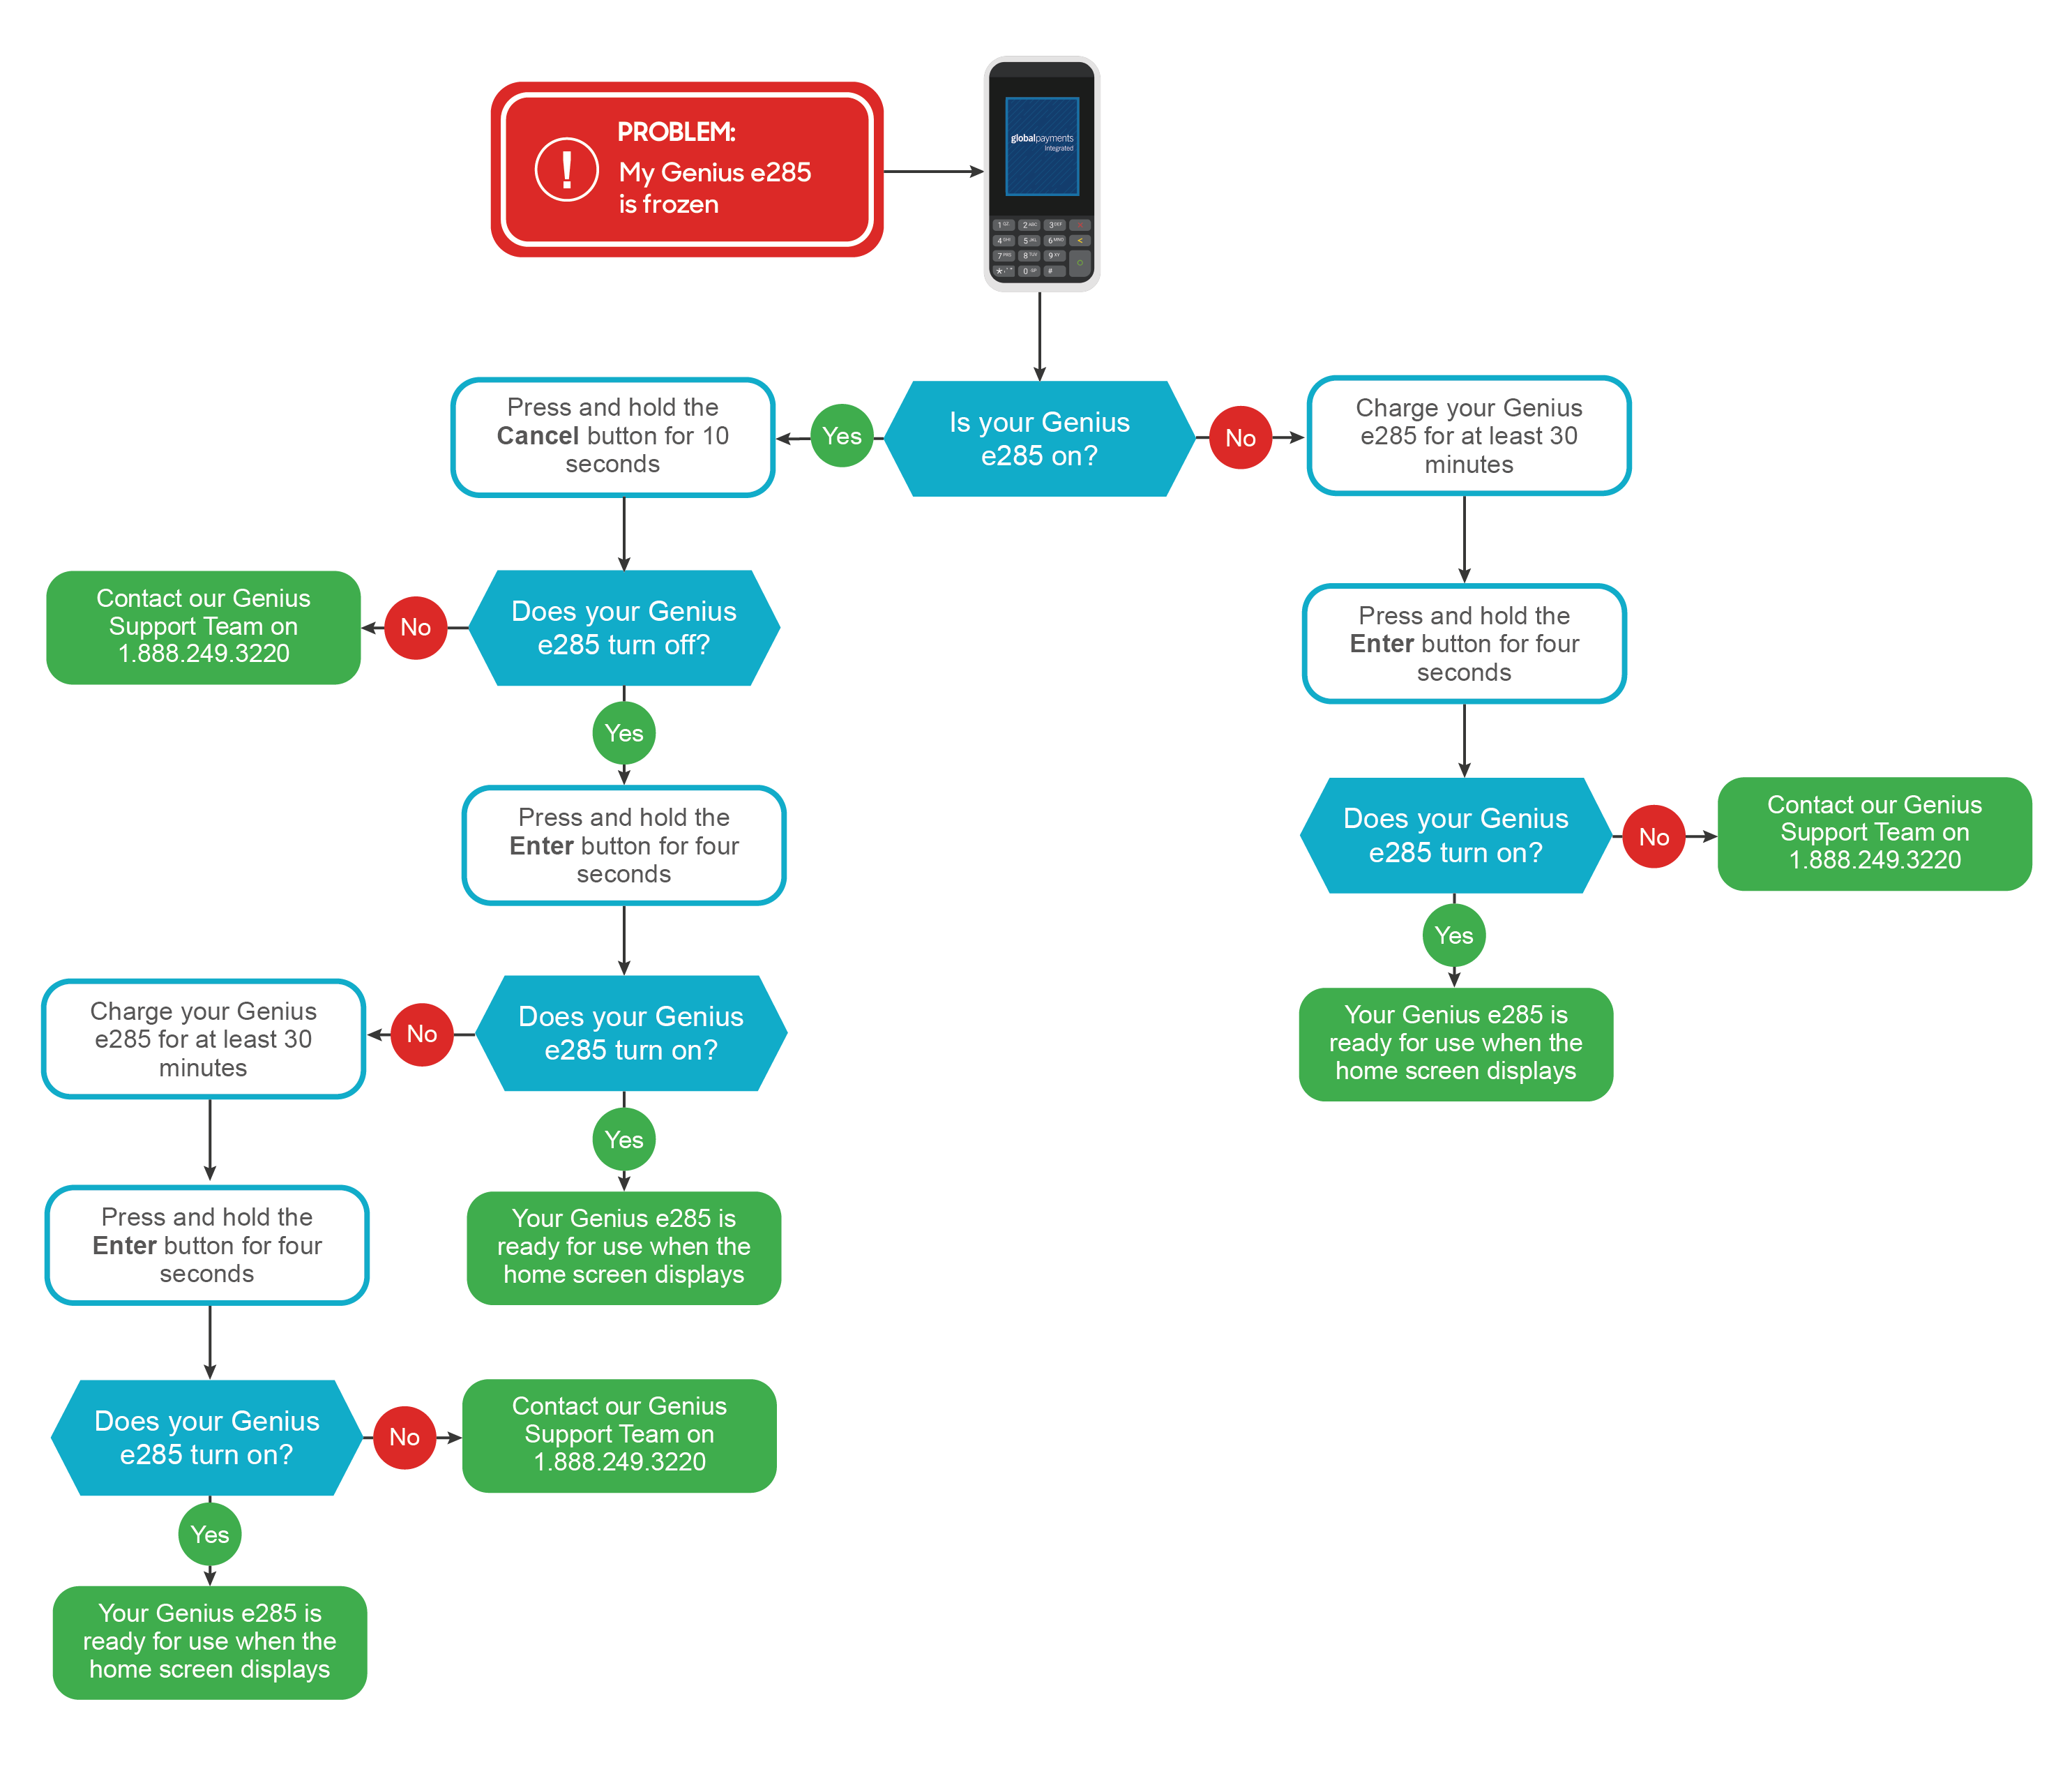 Flowchart with steps to fix a Genius device if it is frozen.